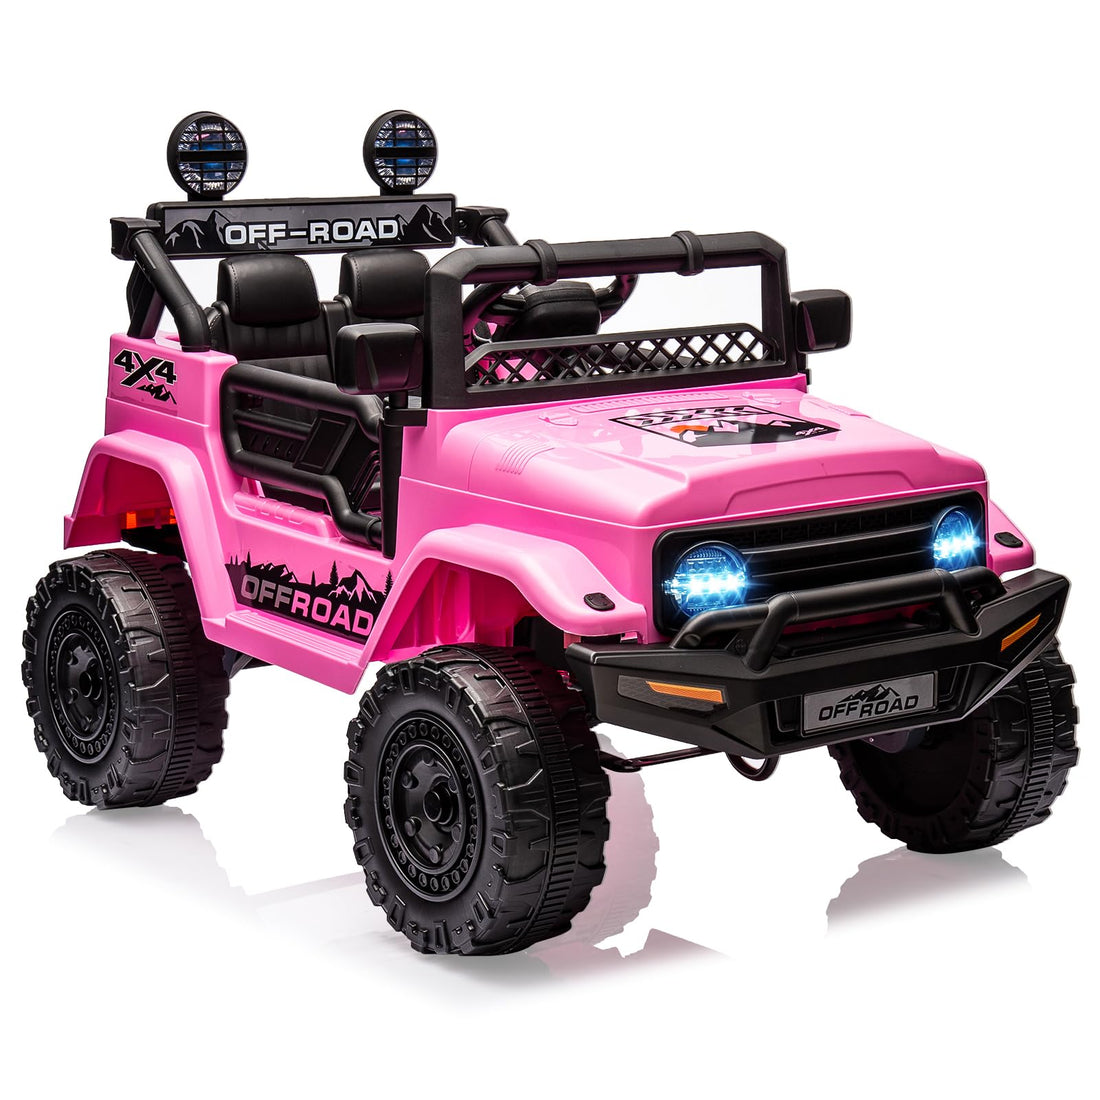 Kids Ride On Truck Car w/Parent Remote Control, 12V Power Wheel Electric Car for Kids, Ride on Toys with Led Lights Bluetooth, 3 Speeds, Spring Suspension